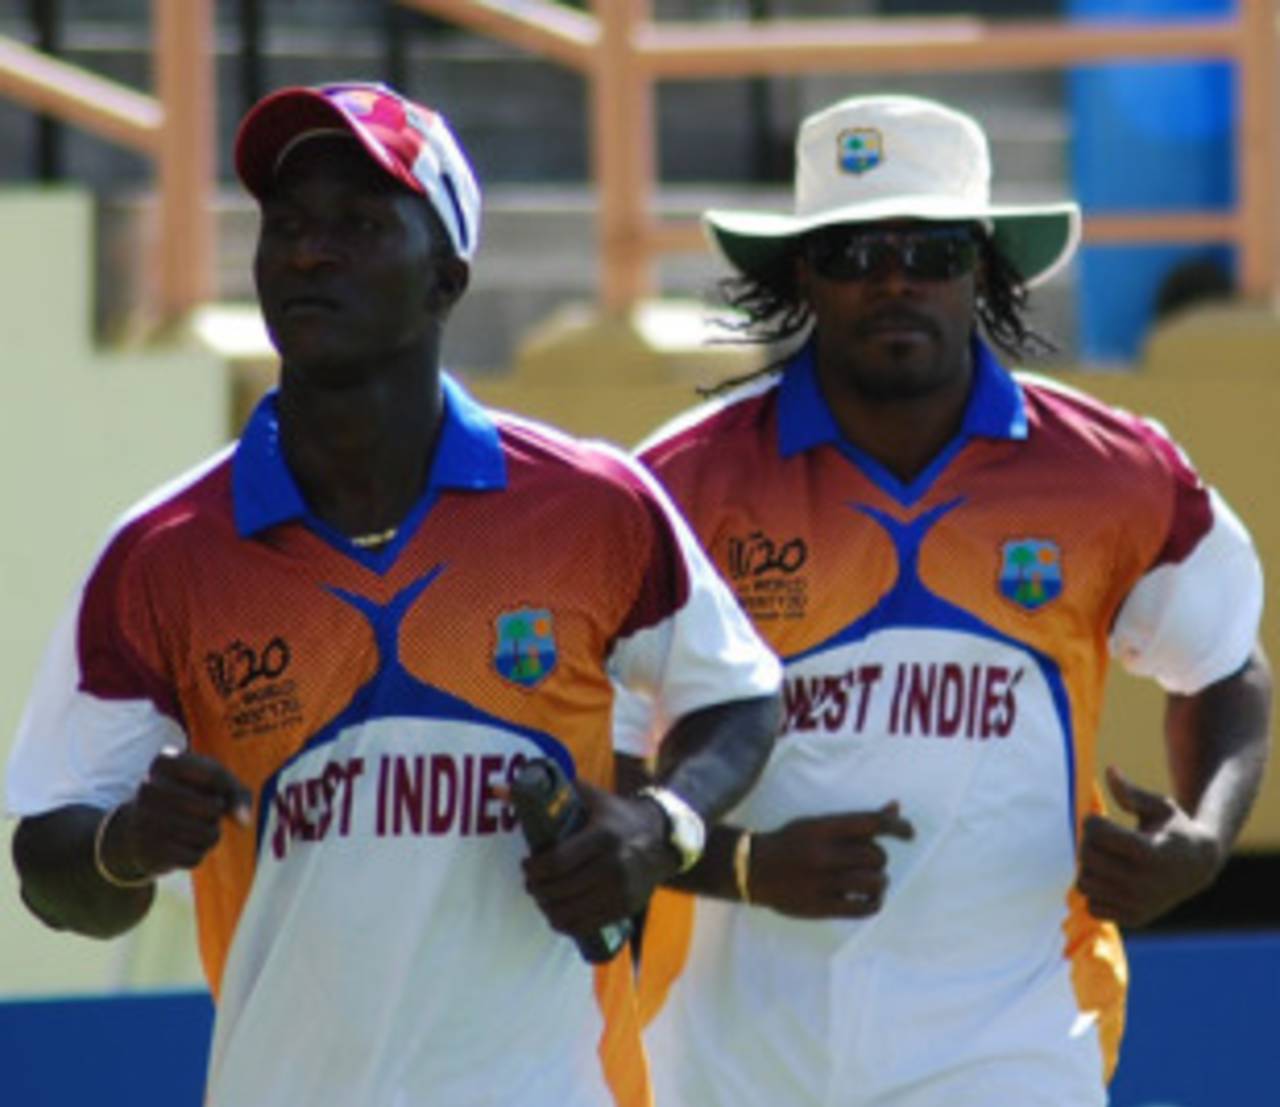 Gayle and Sammy: will they read from the same page?&nbsp;&nbsp;&bull;&nbsp;&nbsp;West Indies Cricket Board